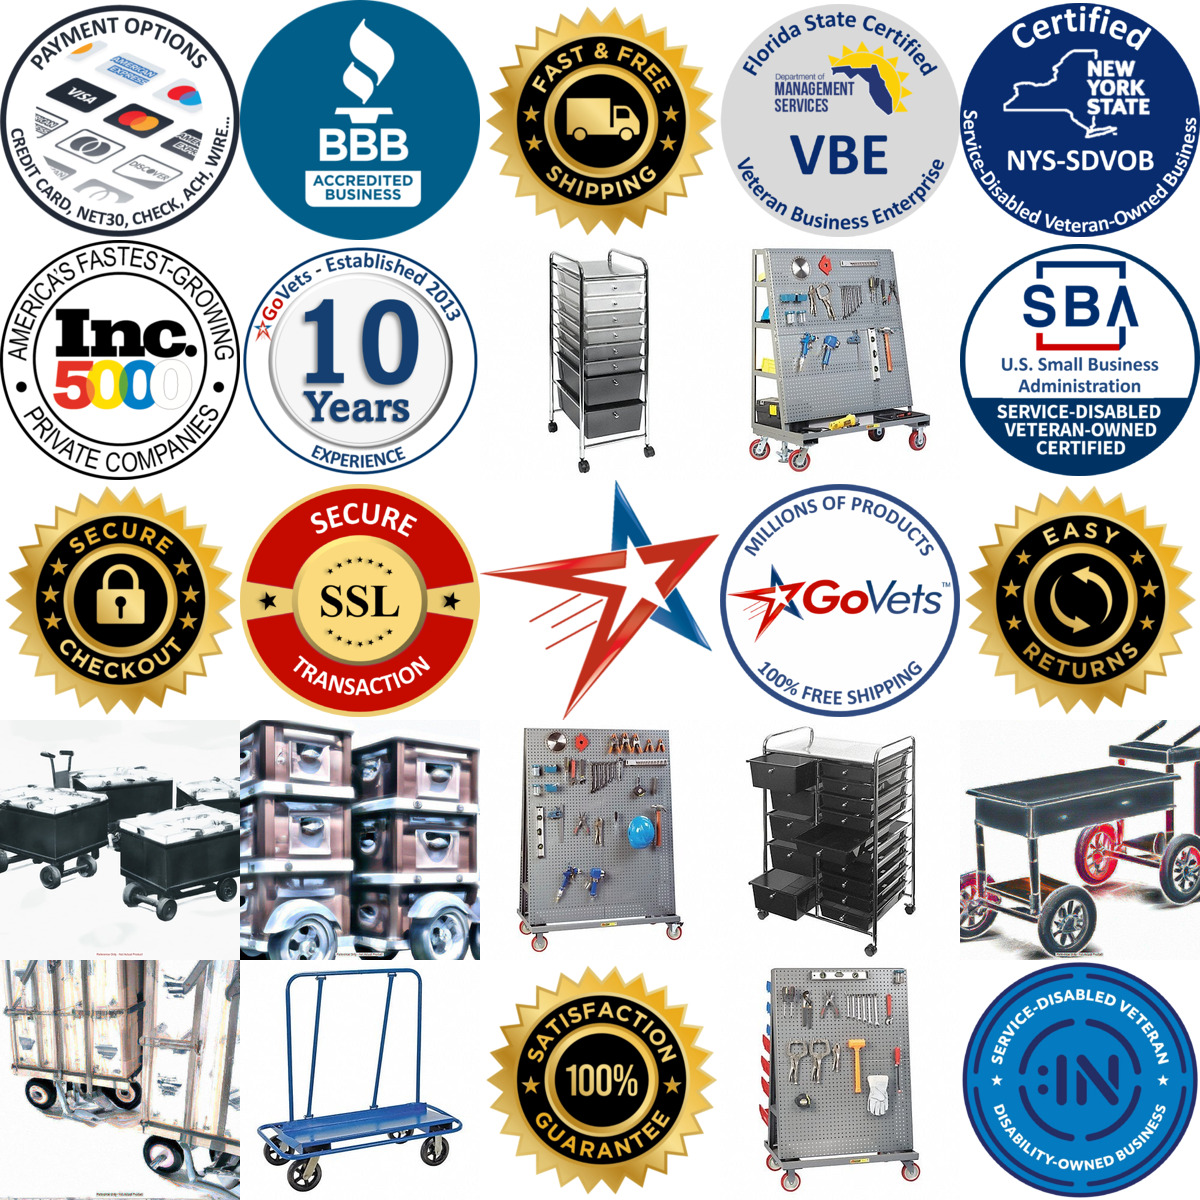 A selection of Carts and Chests products on GoVets